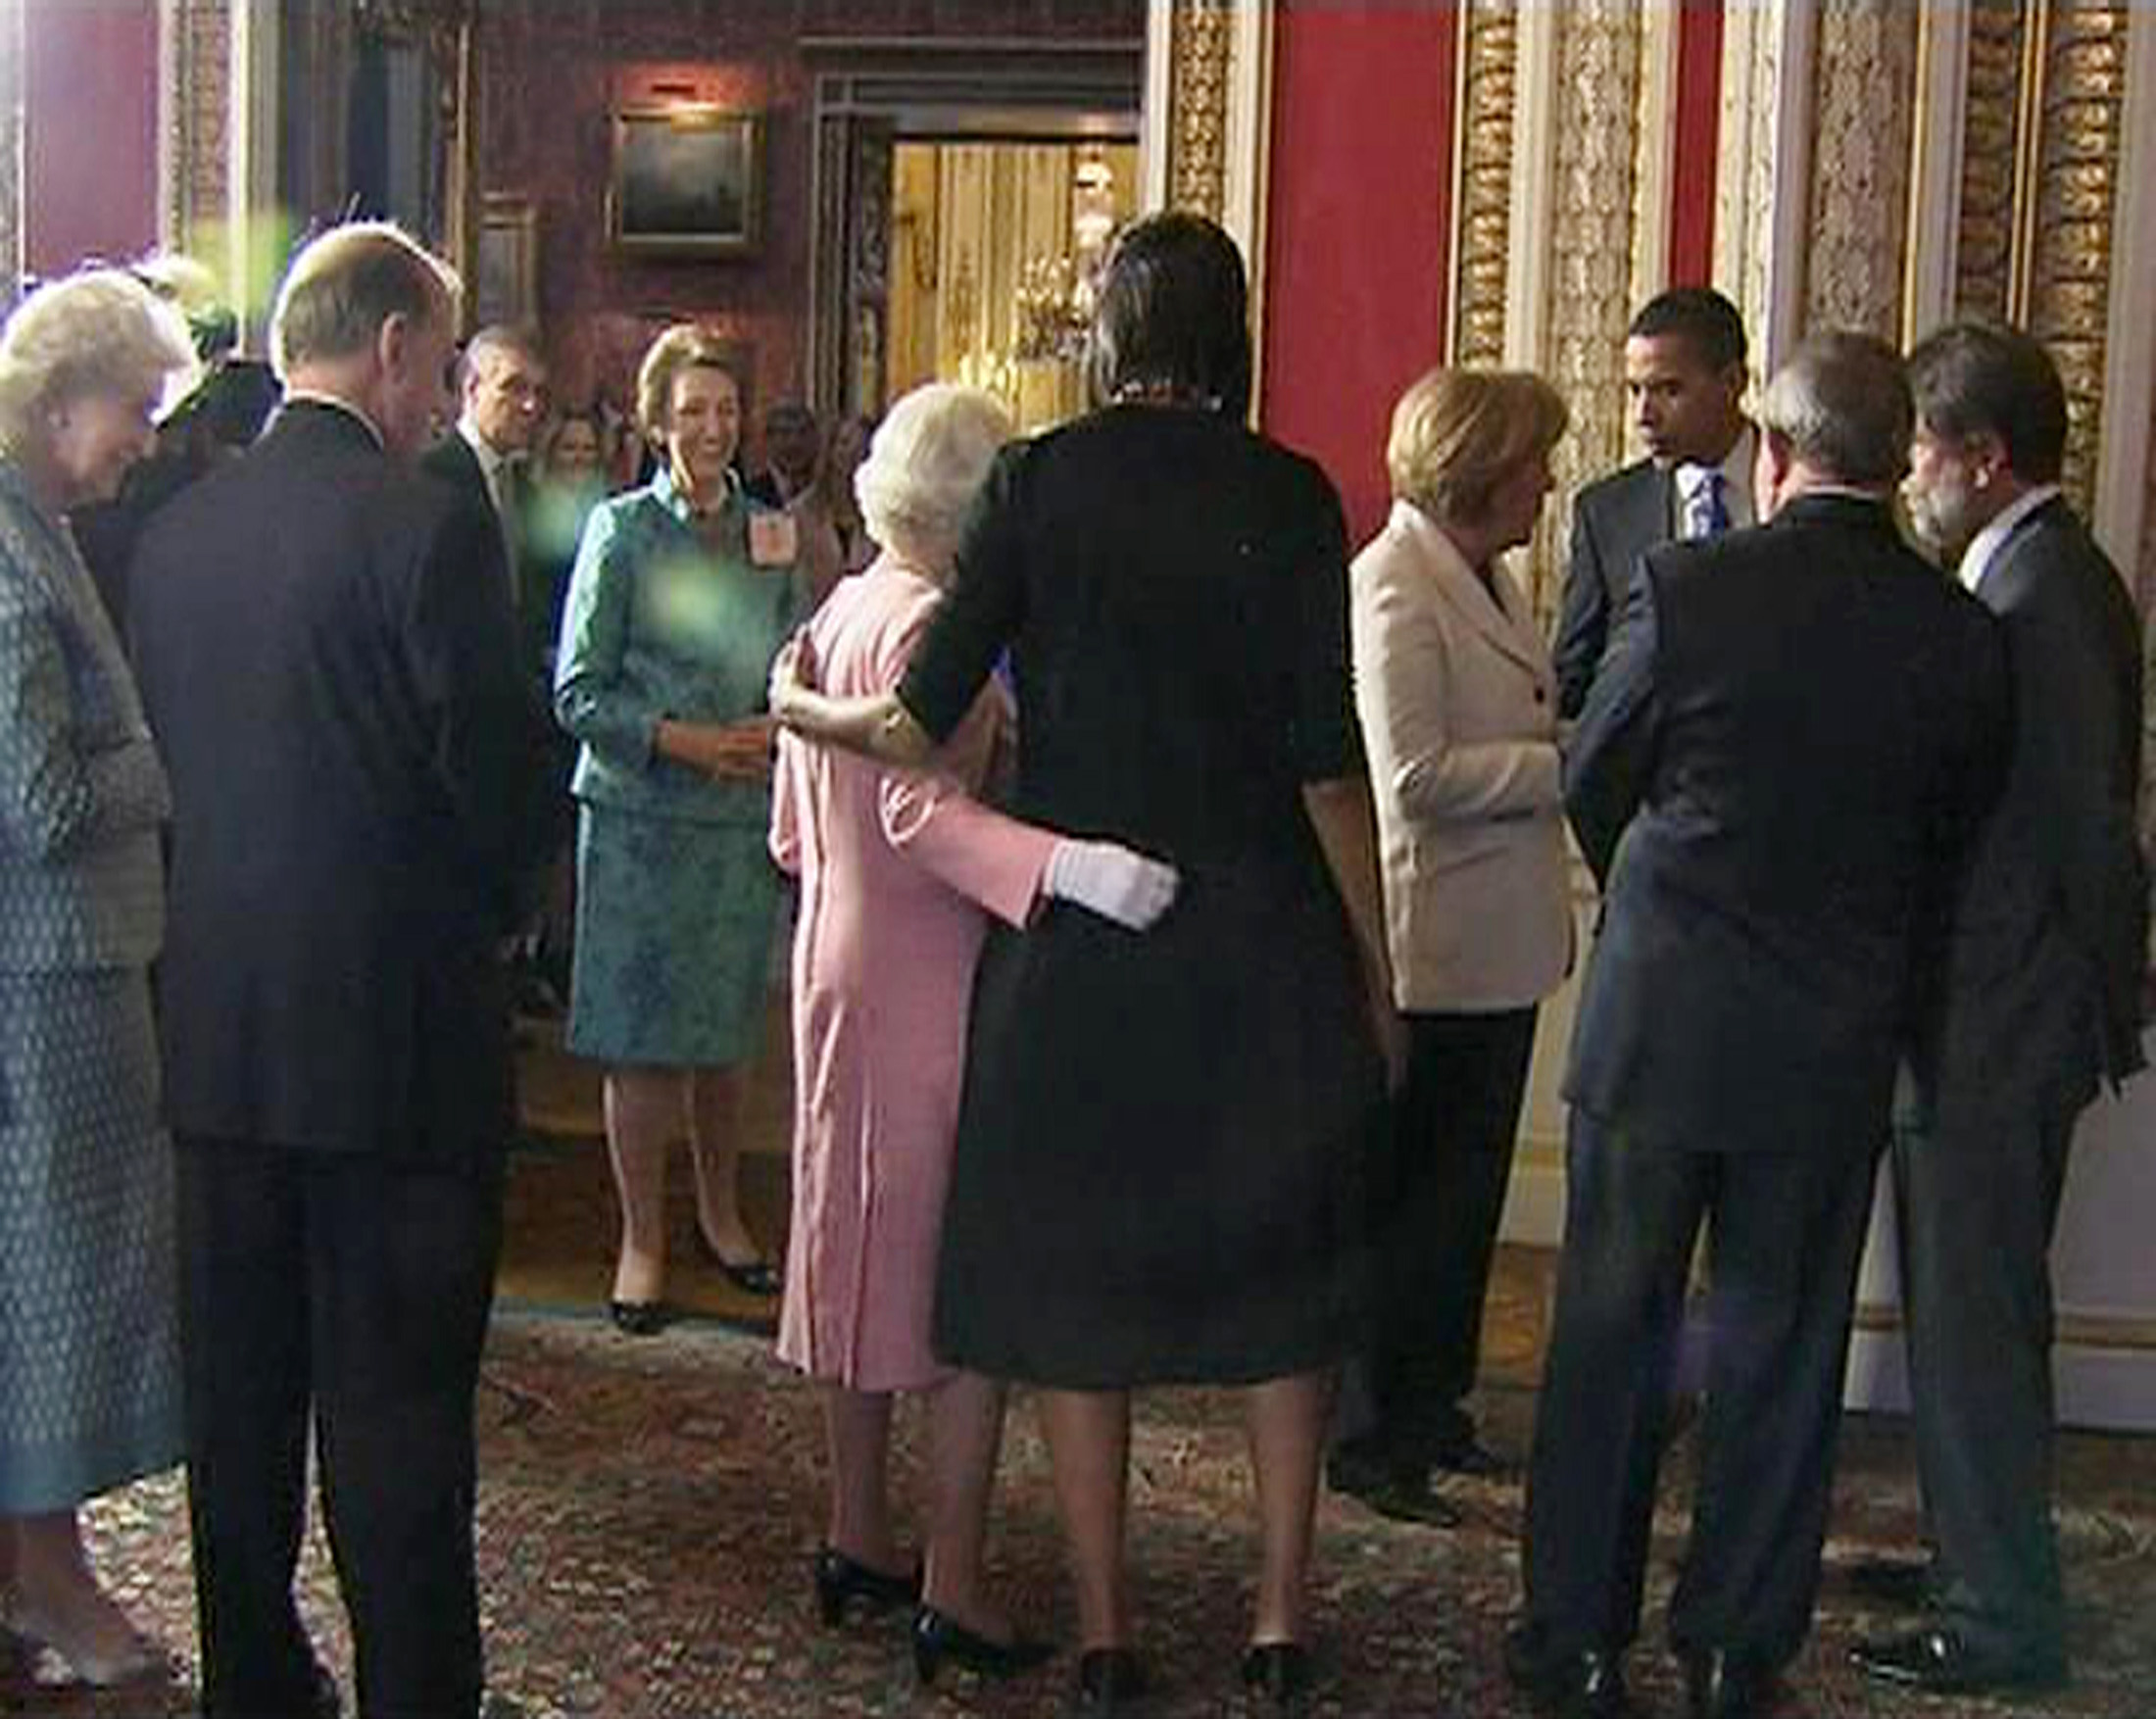 A video grab from television footage shows U.S. first lady Michelle Obama standing with Britain's Queen Elizabeth during a reception for G20 leaders at Buckingham Palace in London, April 1, 2009.